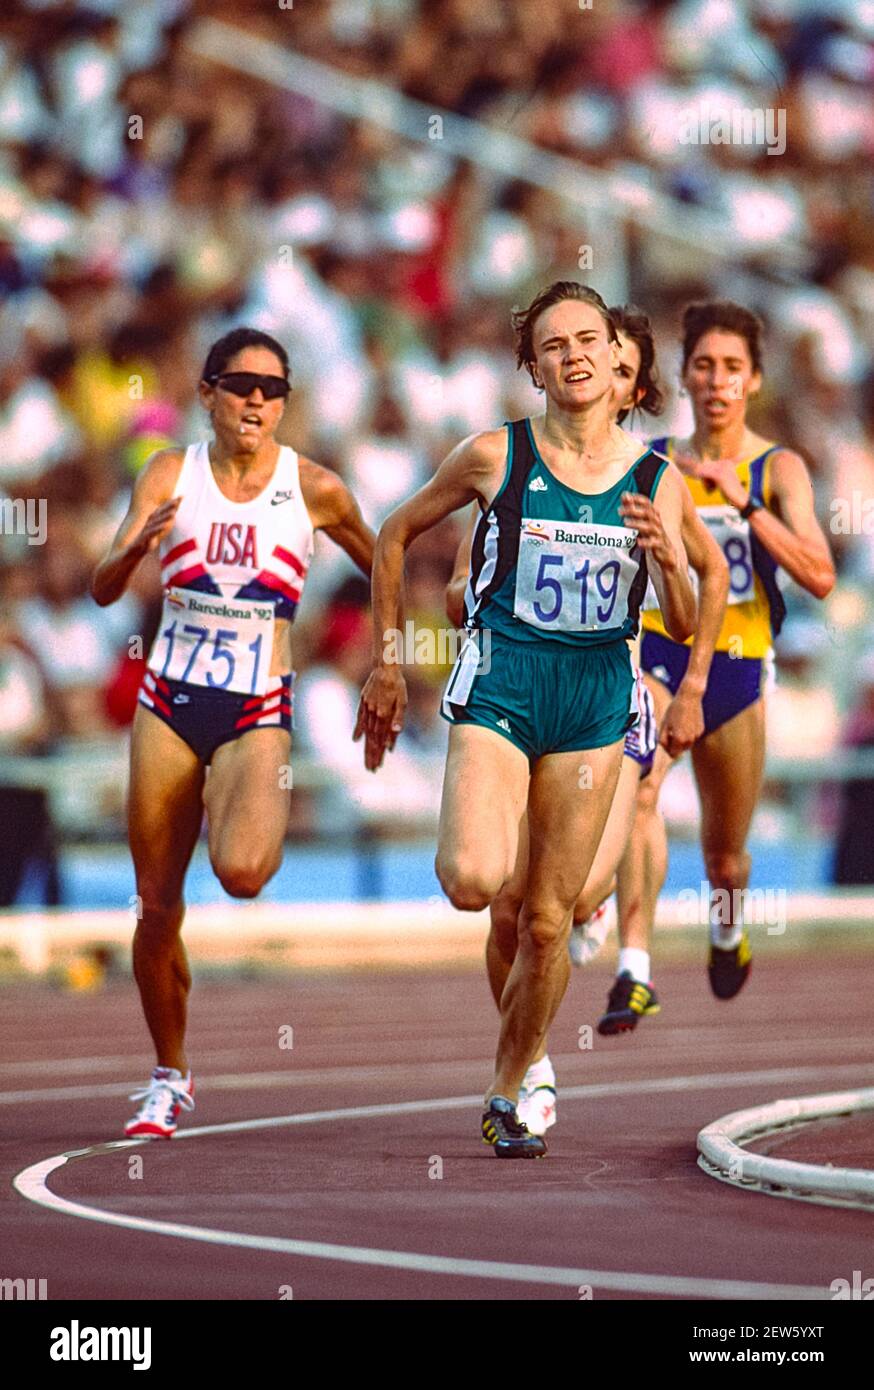 PattiSue Plumer, USA #1751 Catherina McKiernan (IRL) #519 competing in th Women's 3,000m Ht#1 at the 1992 Olympic Summer Games. Stock Photo